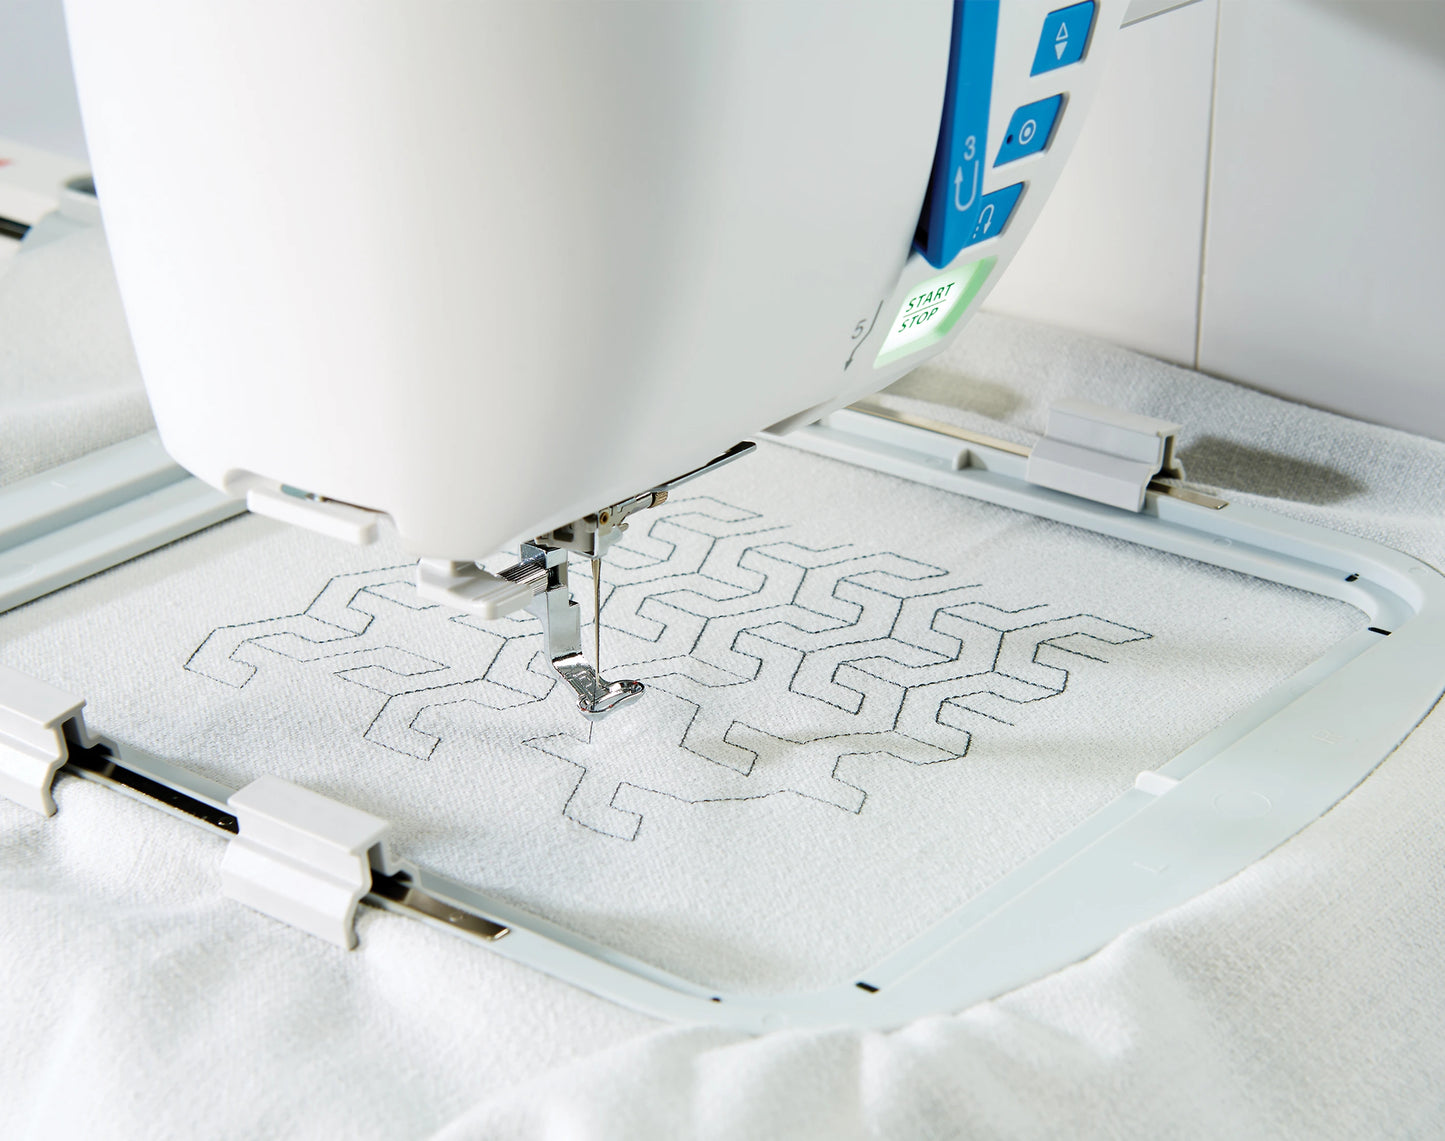 Janome Atelier 9 - Sewing & Embroidery Machine